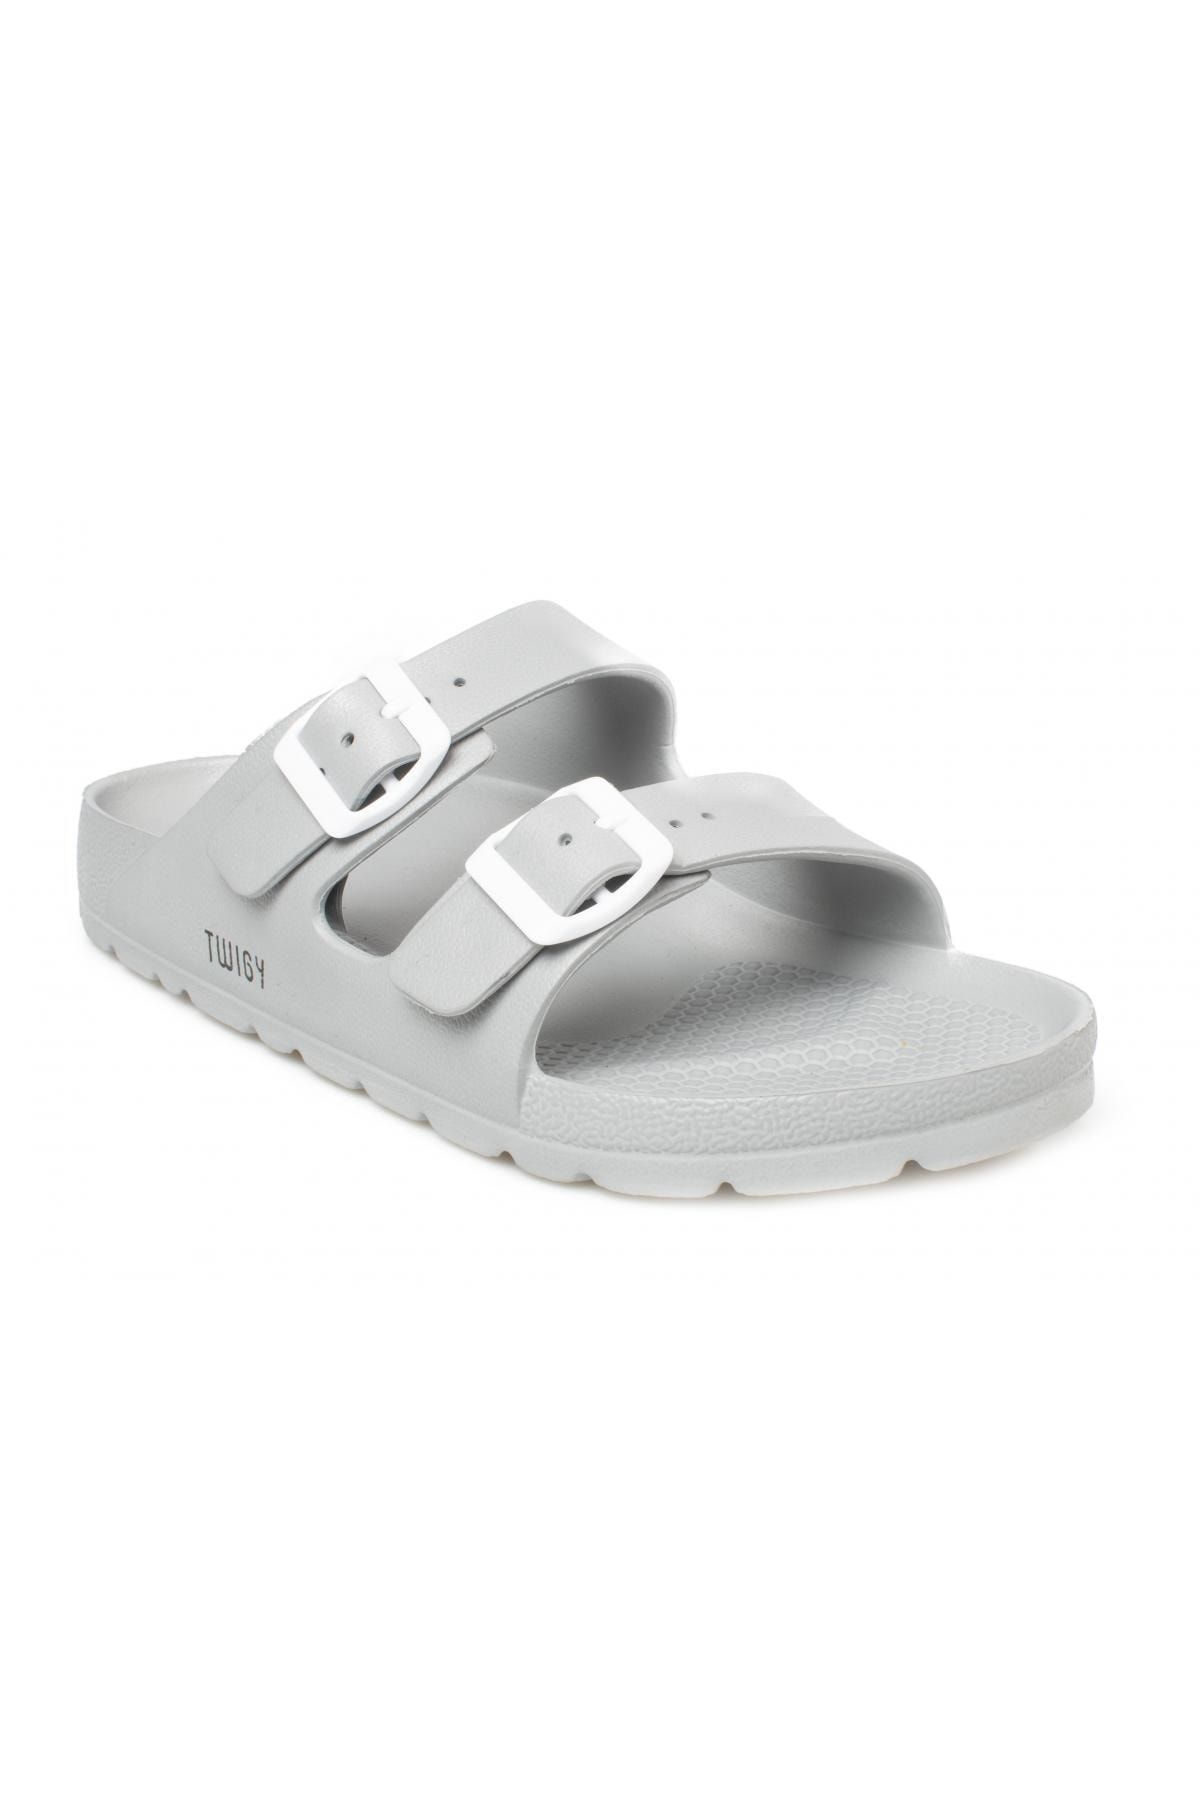 Twigy M1017 DOUBLE BAND GRAY WOMAN SLIPPERS